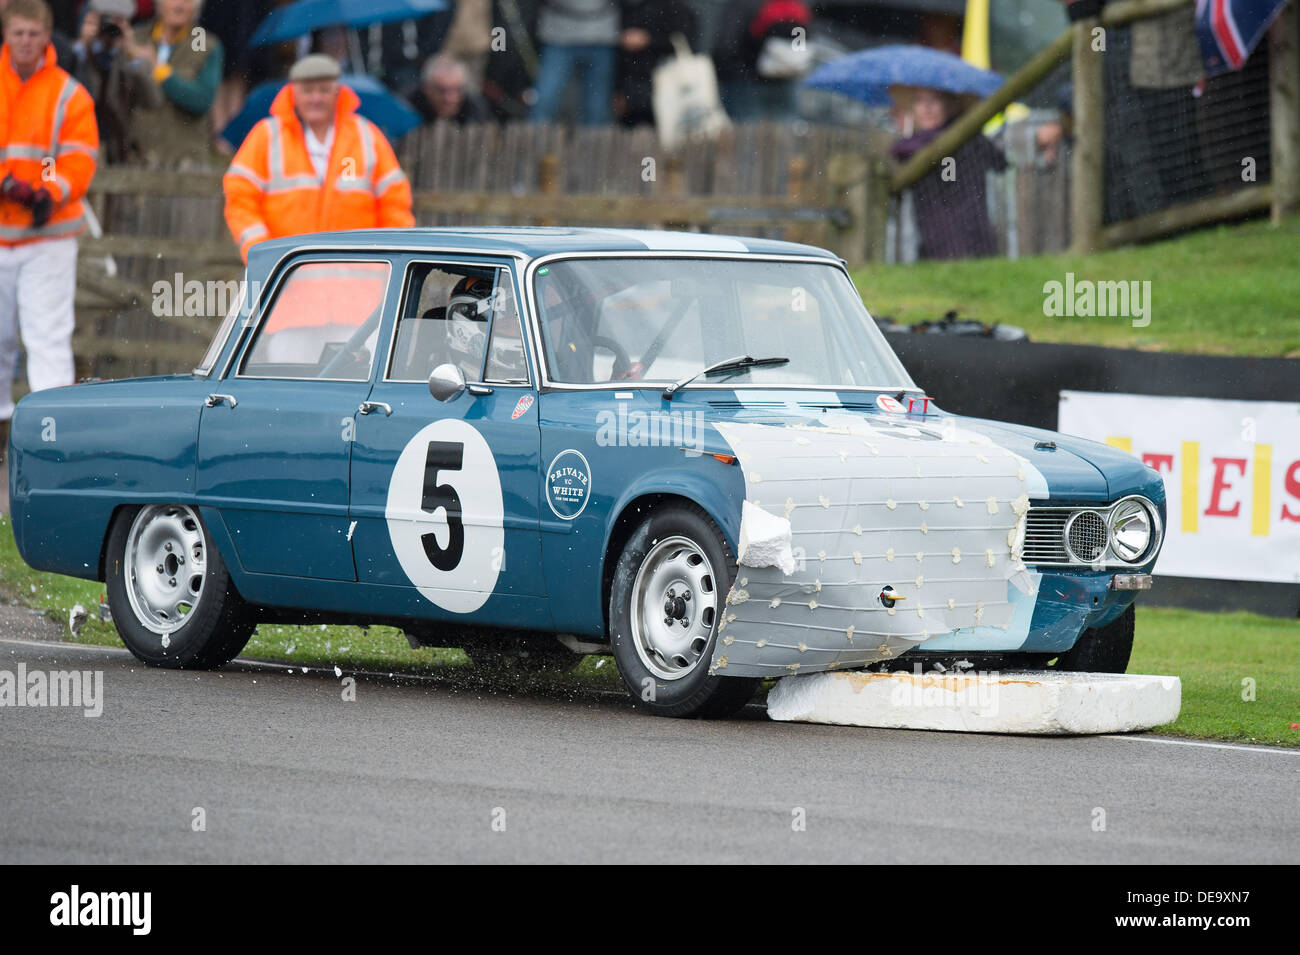 Chichester, West Sussex, UK. 13th Sep, 2013. Goodwood Revival. Goodwood Racing Circuit, West Sussex - Friday 13th September. A car smashes into the polystyrene chicane during a qualifying session. © MeonStock/Alamy Live News Stock Photo